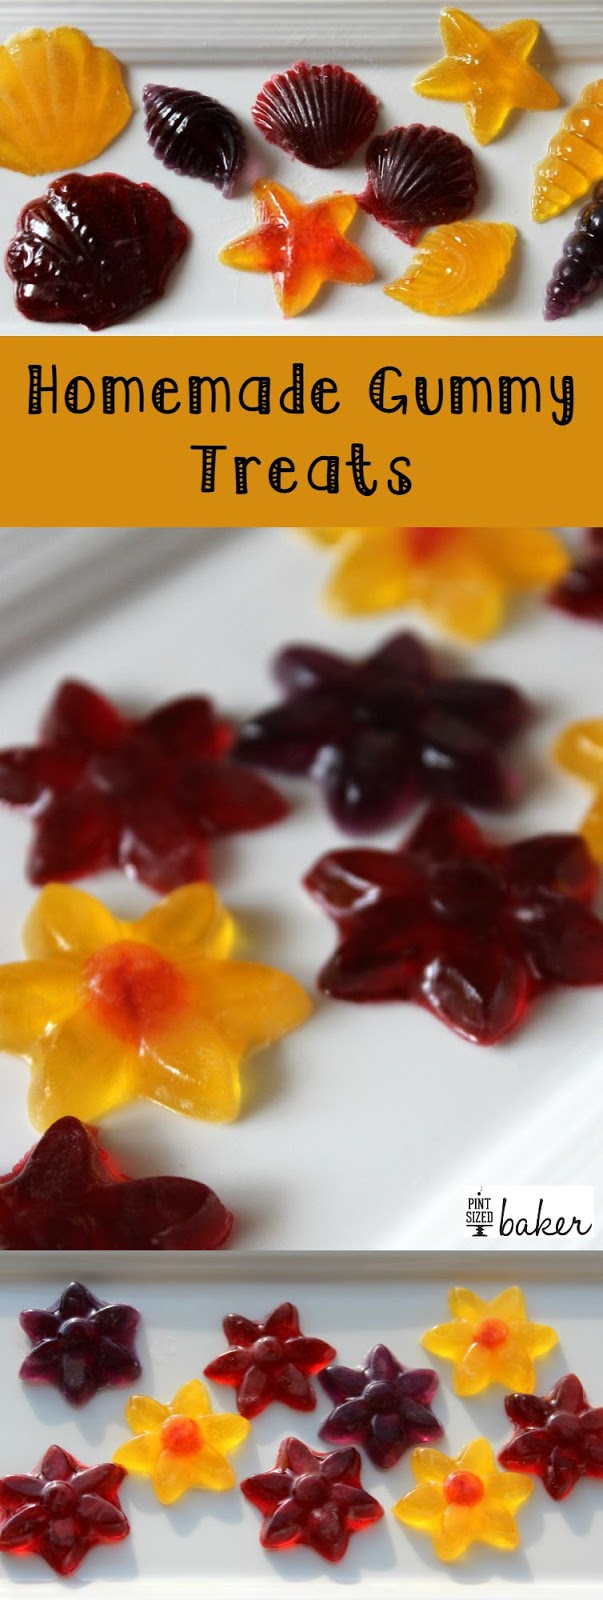 Make some homemade gummy treats for the kids. They can pick their favorite jello flavors and fun molds to make them in. They're perfect for lunchboxes.